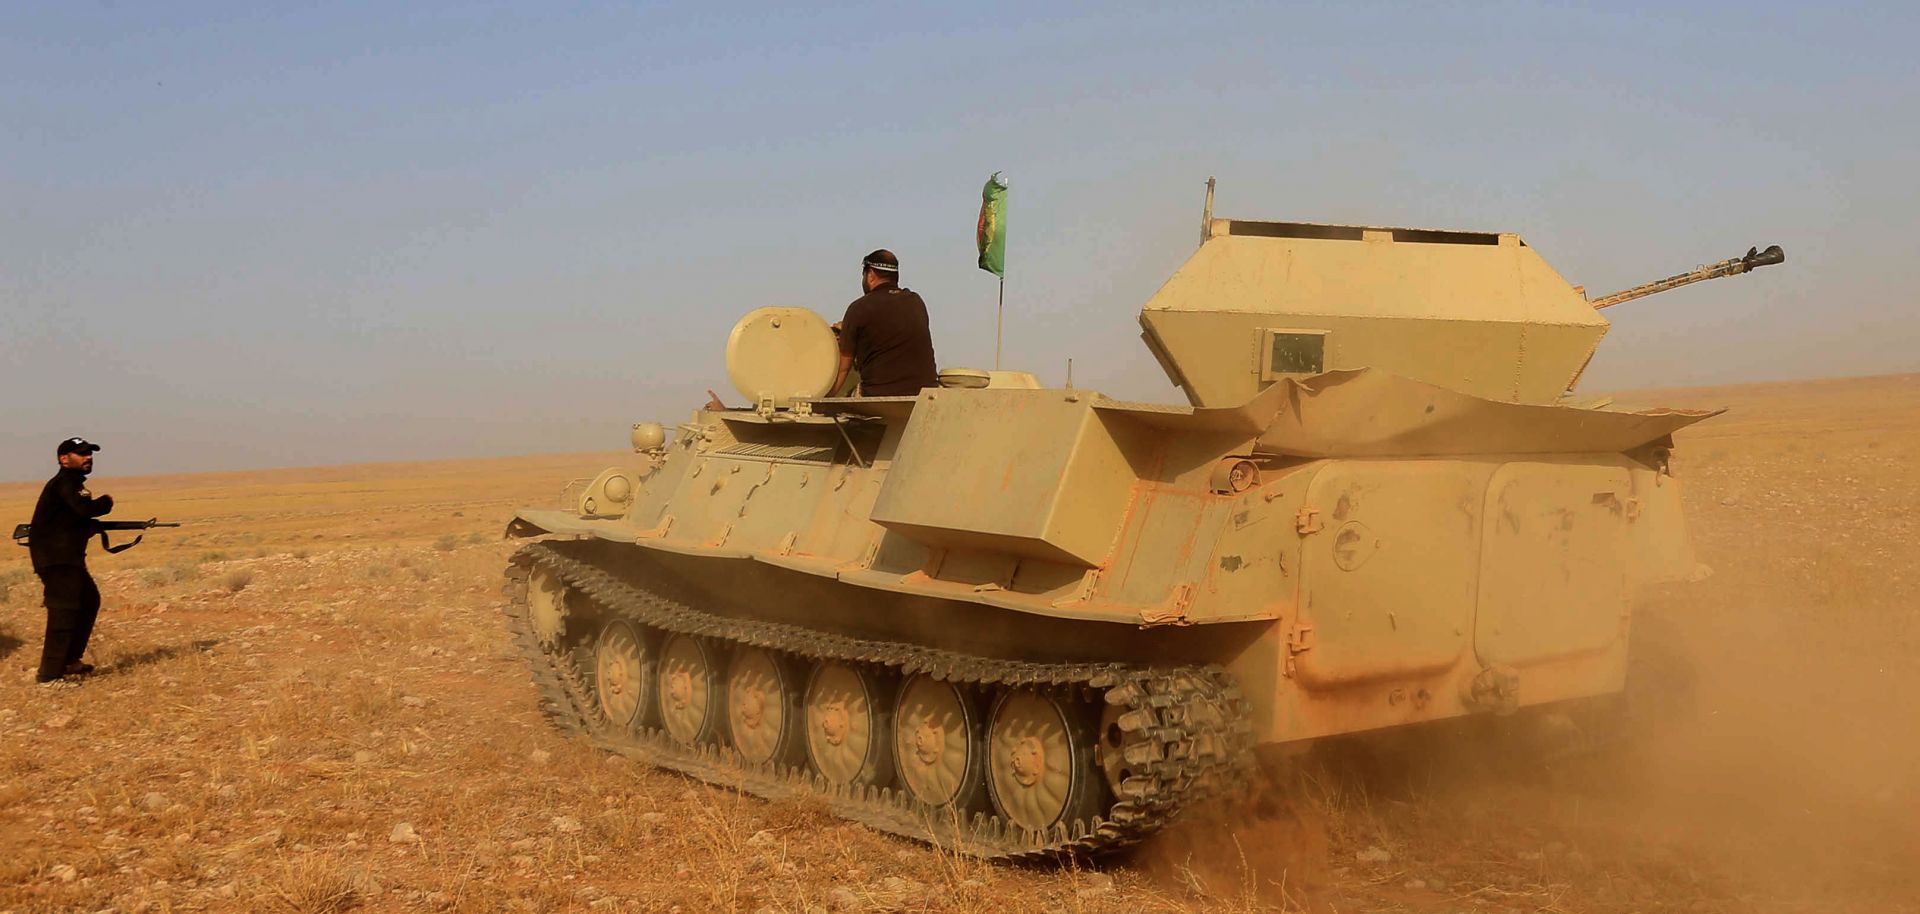 An infantry fighting vehicle belonging to one of Iraq's popular mobilization units maneuvers in the desert near Anbar province on Sept. 16, 2019.